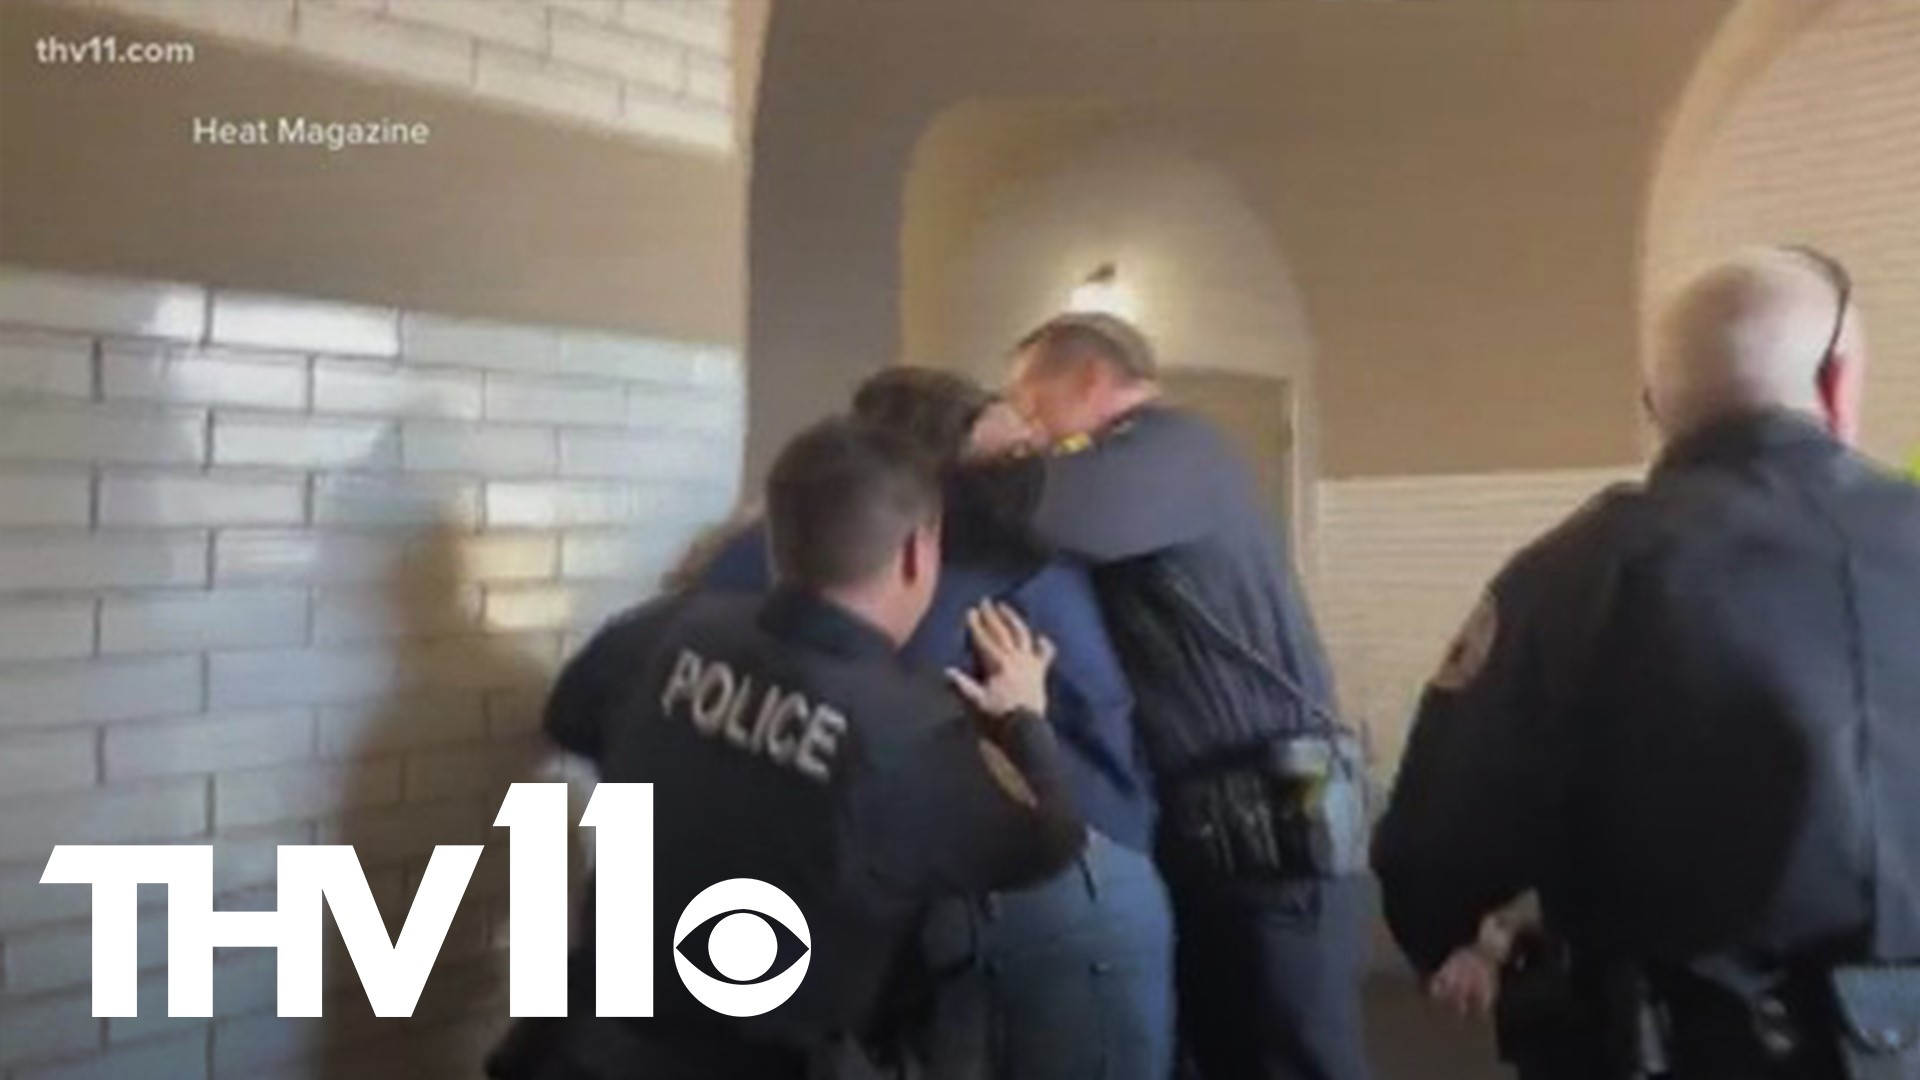 State legislators are back to work, discussing the state's budget for the coming fiscal year. But the day had some unexpected turns that resulted in arrests.